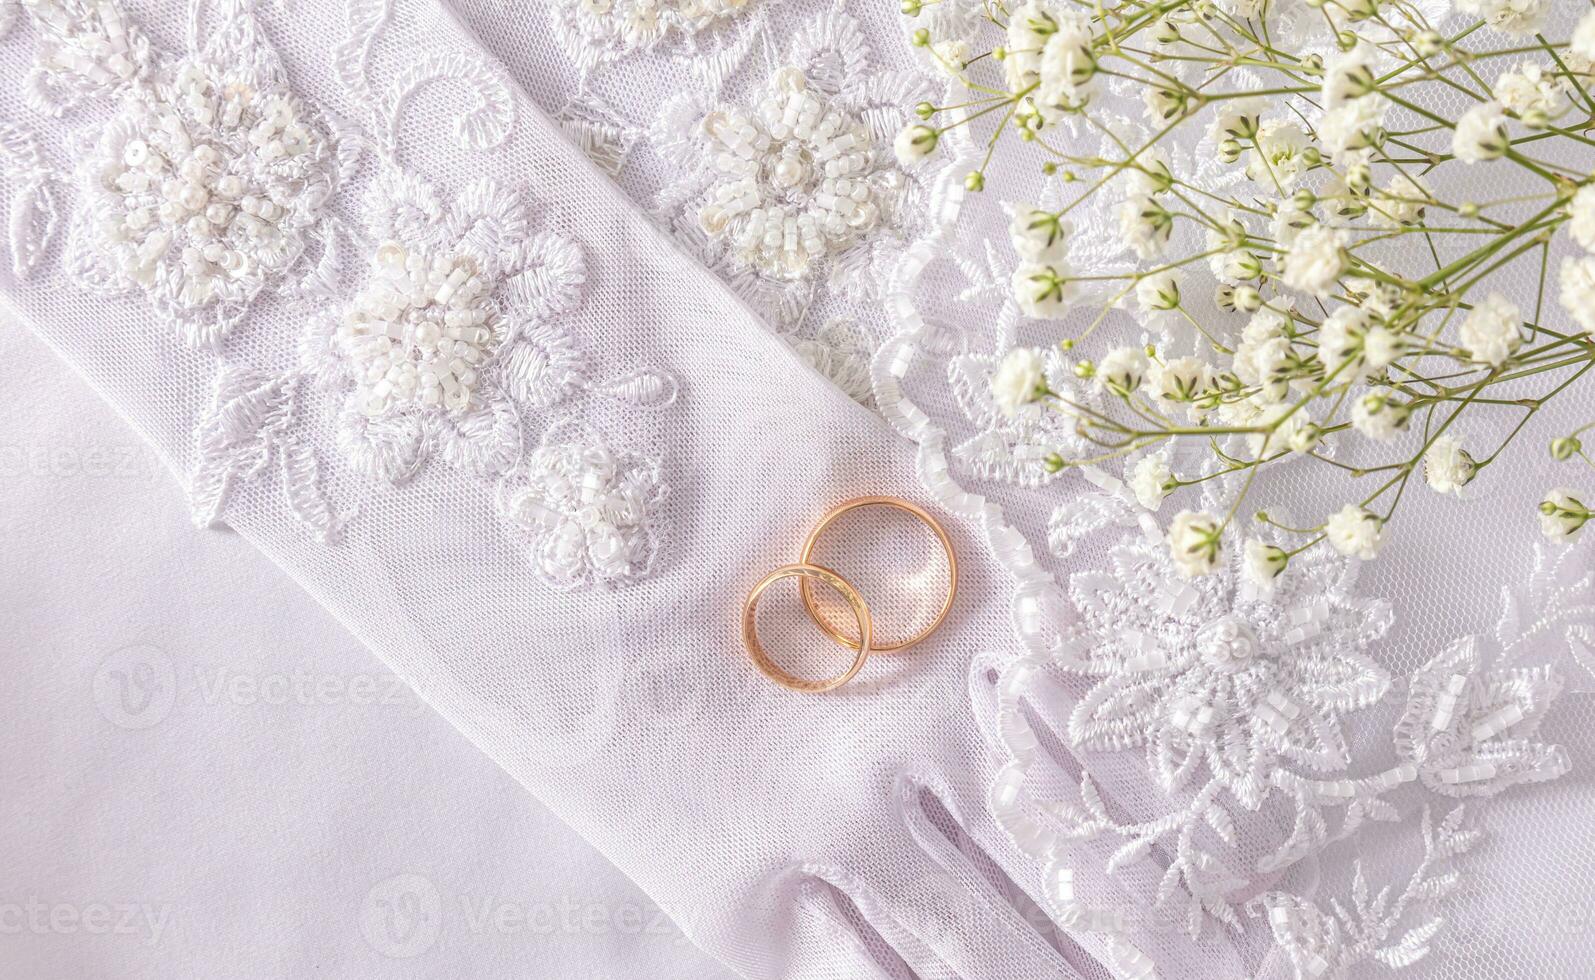 Two gold wedding rings lie on the bride's chic beaded gloves embroidered with beads and sequins. Top view. Satin white background. photo